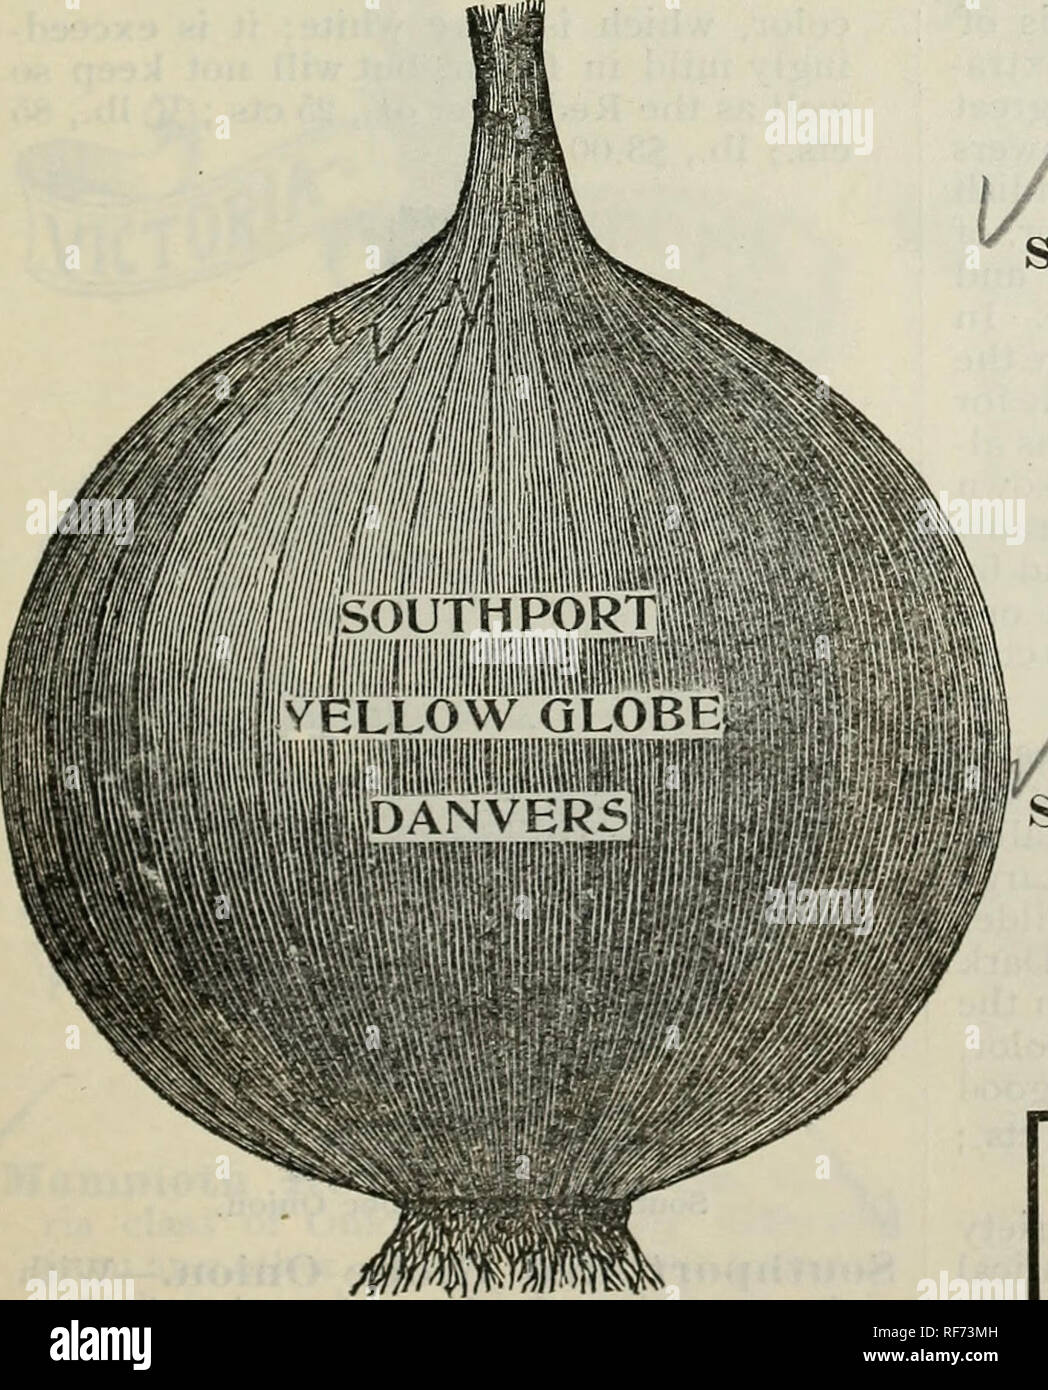 . Buist's garden guide and almanac : 1902. Nursery stock Pennsylvania Philadelphia Catalogs; Vegetables Seeds Catalogs; Flowers Seeds Catalogs. L,arge Red Wethersfield Onion. stews. Per oz., 15 cts.; % lb., 30 cts.; lb., fl.00; 5 lbs., at 95c; 10 lbs. at 90c. per lb. &quot;White Silver Skin.—This is the famous variety which is sown so extensively in Philadelphia for growing Onion Sets, from which full-grown onions are produced by June and July; it is not only the mildest but the most delicate flavored variety, and generally preferred for table use; is of the same shape as the Yellow Strasburg, Stock Photo